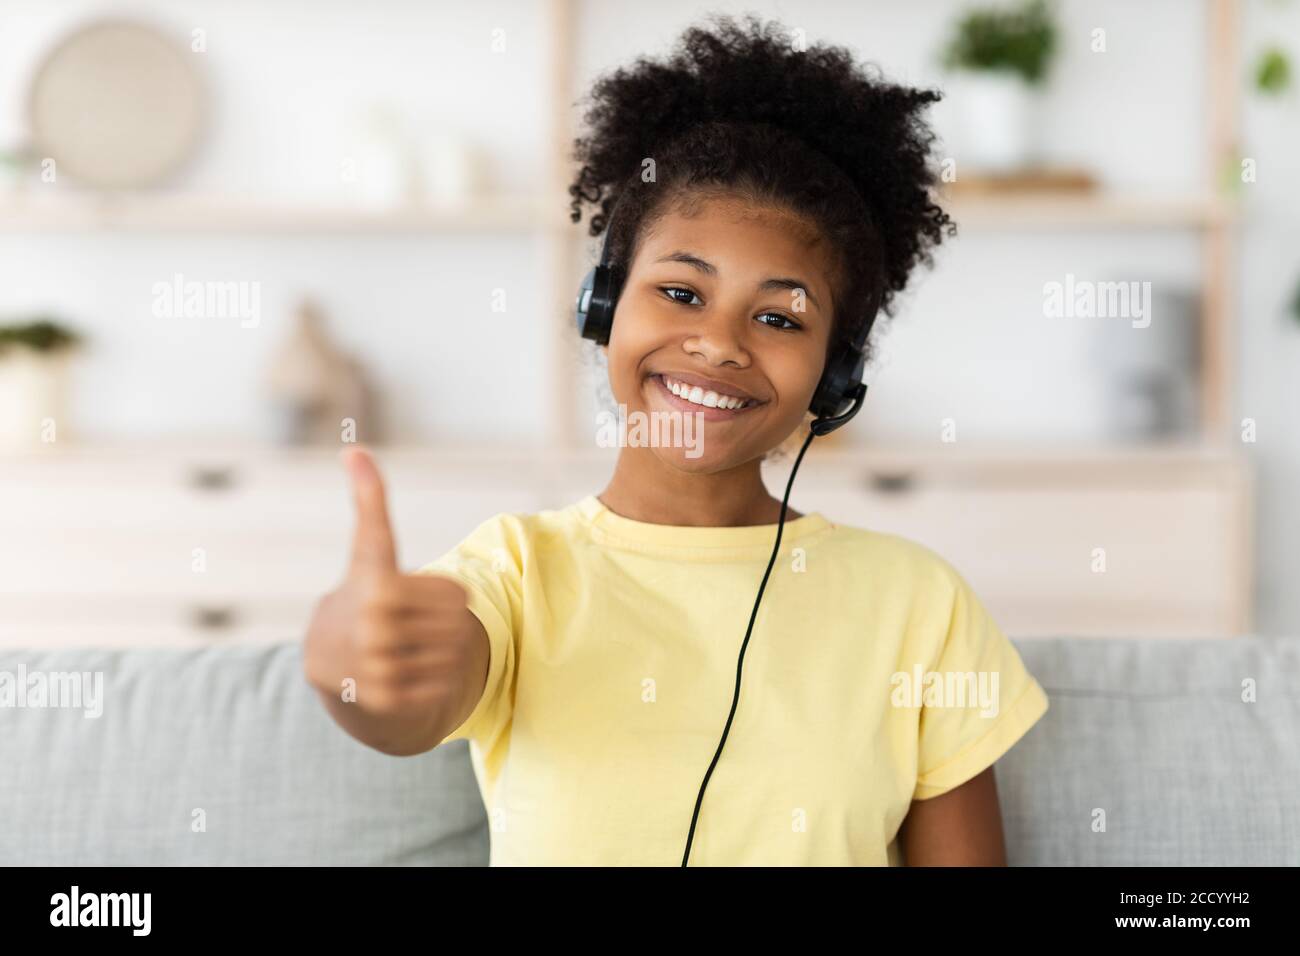 Black Girl With Headphones Gesturing Thumbs-Up Sitting On Couch Indoor Stock Photo